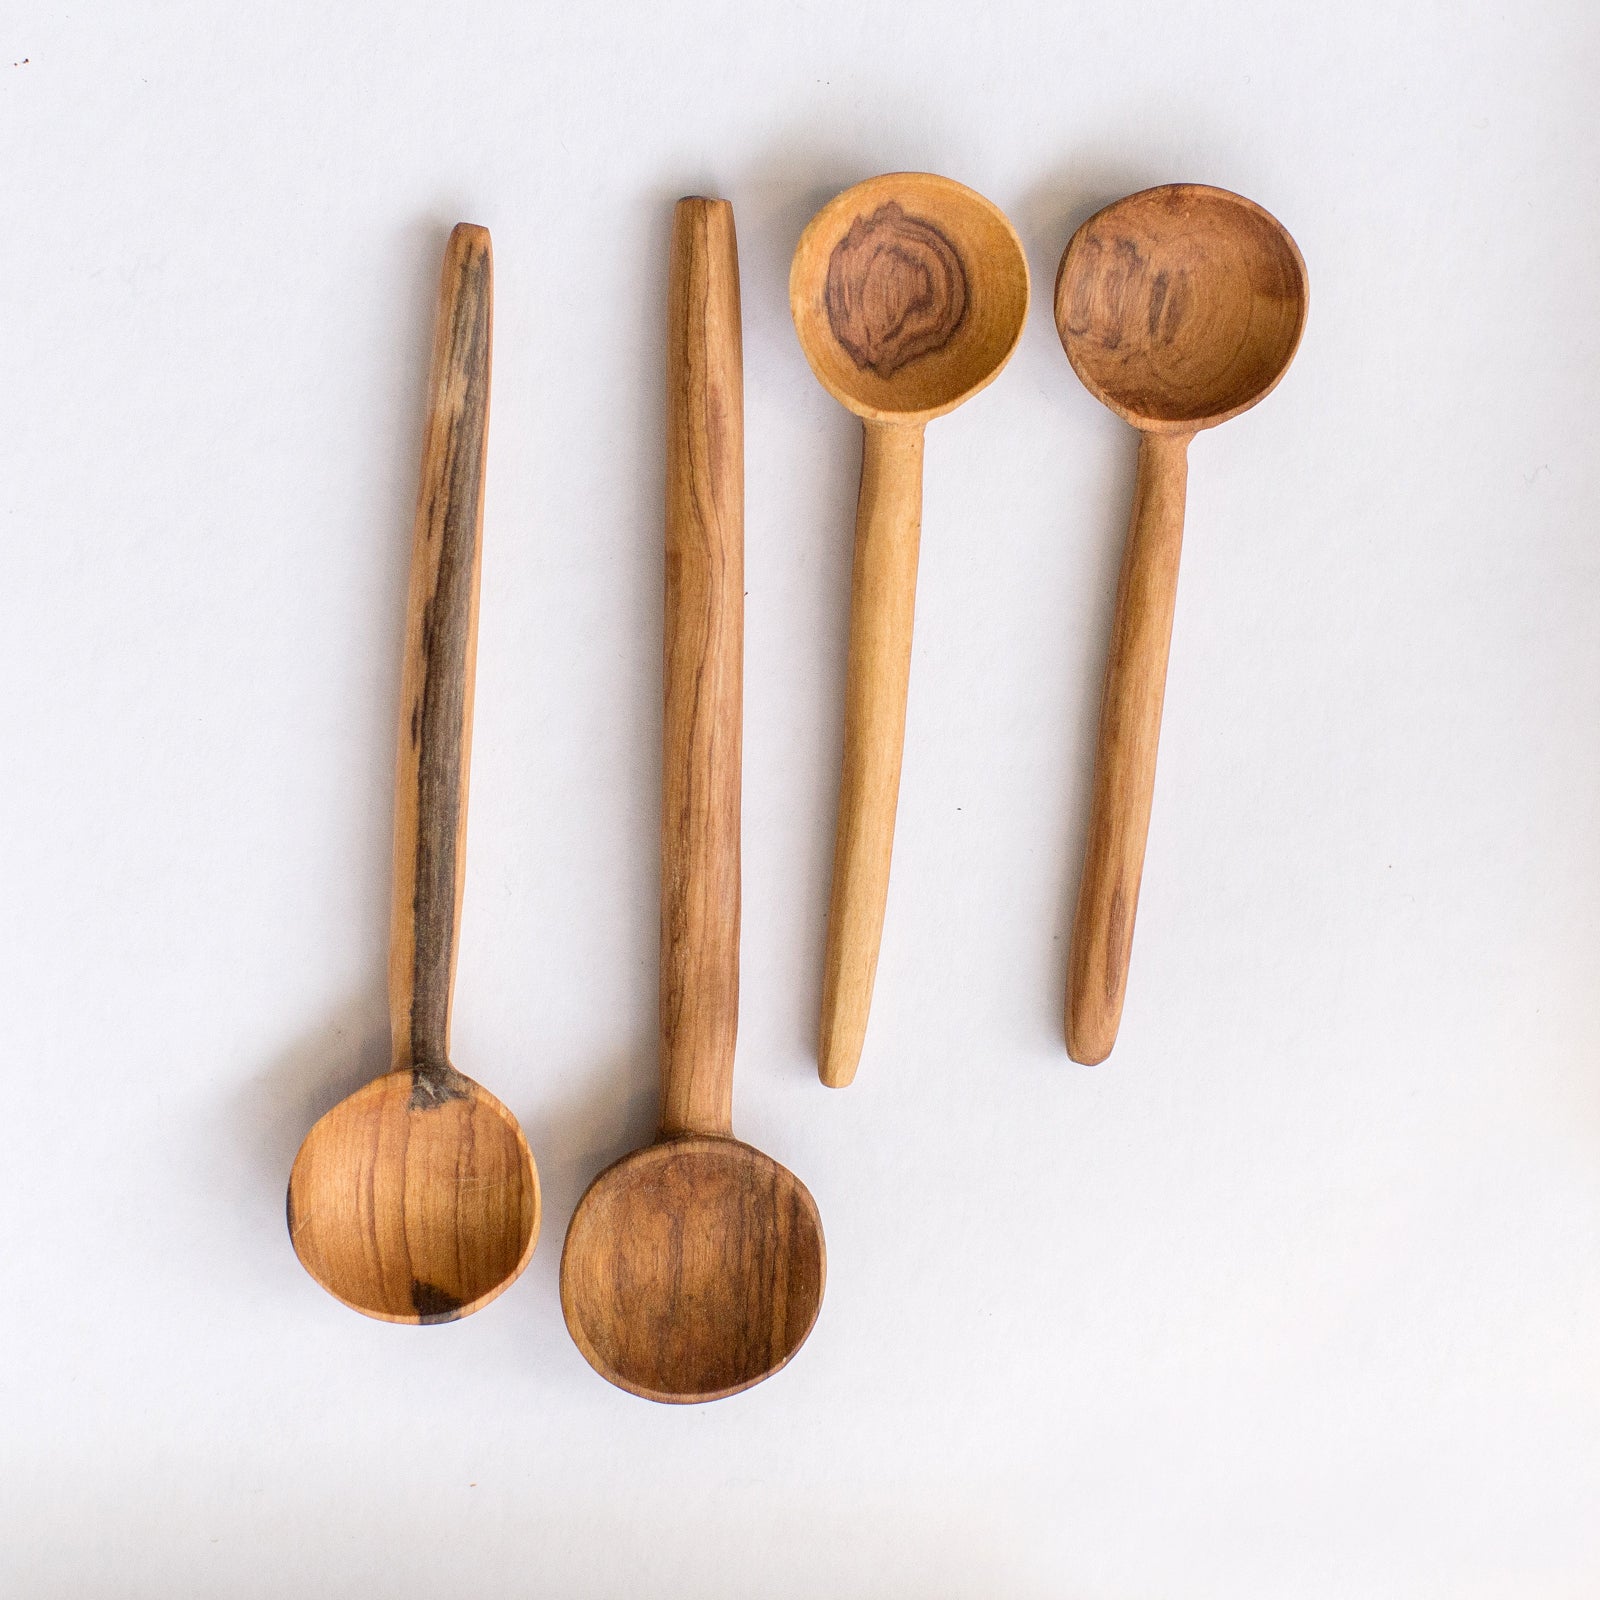 JustOne's small handcrafted, wooden, coffee spoon, made in Kenya